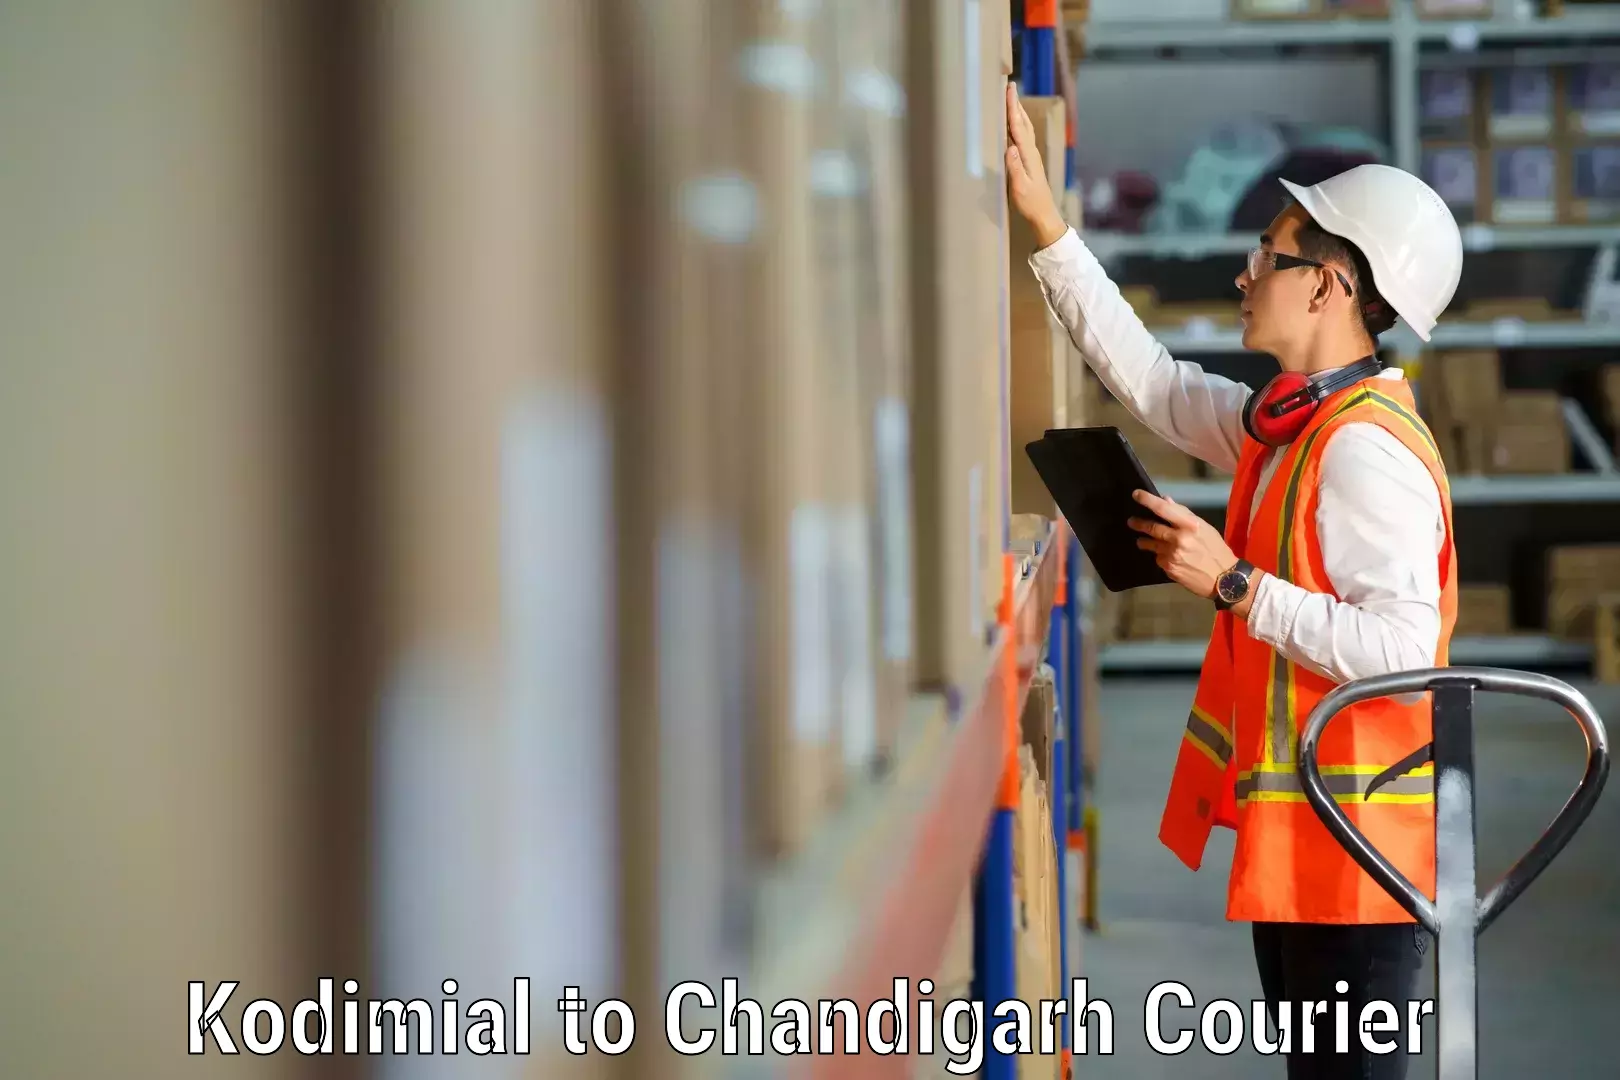 Furniture moving experts Kodimial to Chandigarh